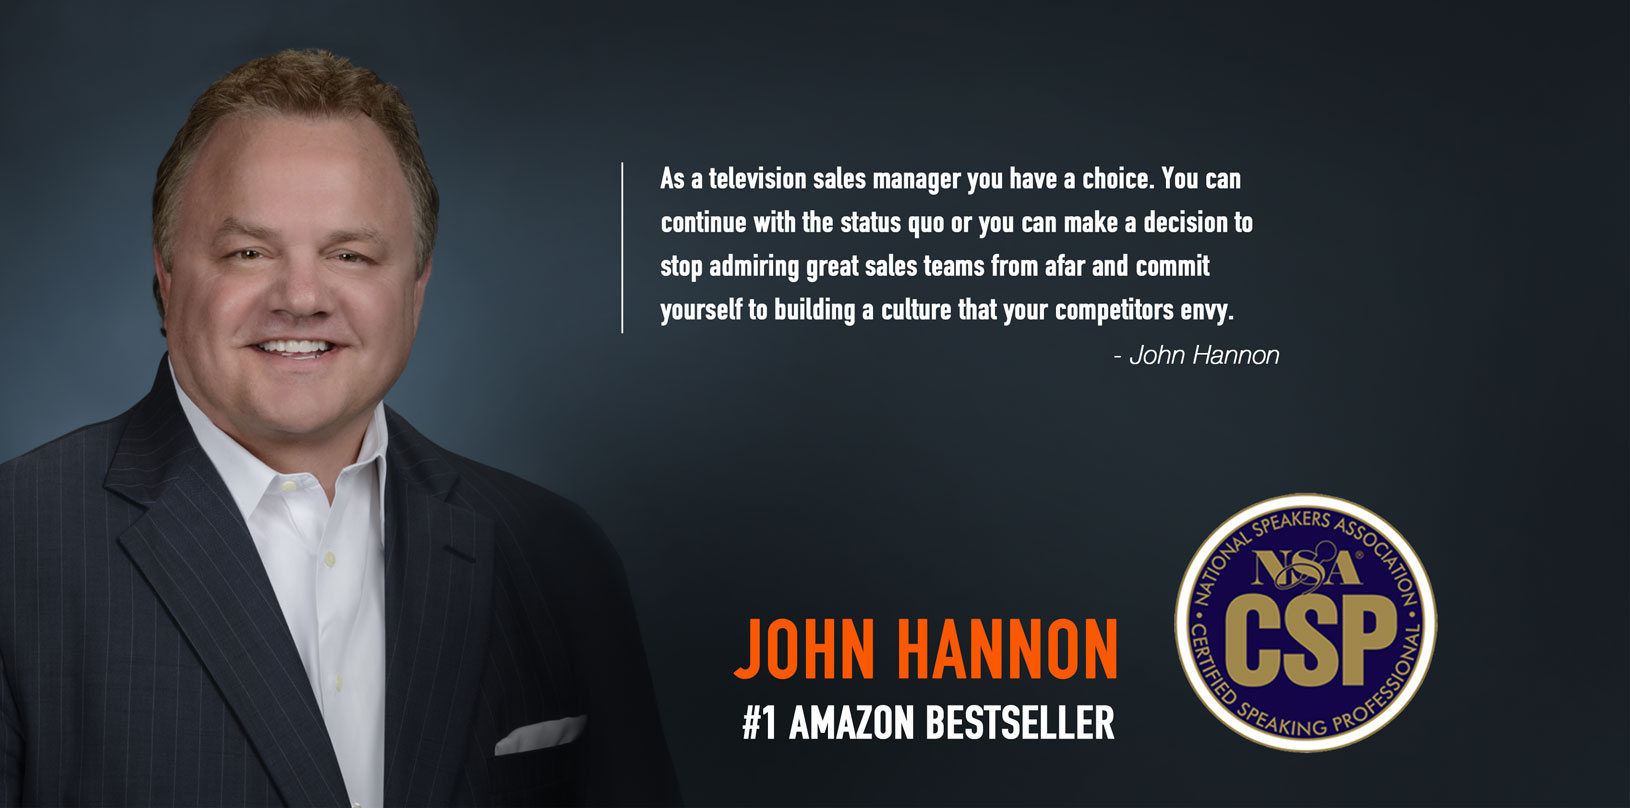 As a television sales manager you have a choice. You can continue with the status quo or you can make a decision to stop admiring great sales teams from afar and commit yourself to building a culture that your competitors envy.- John Hannon